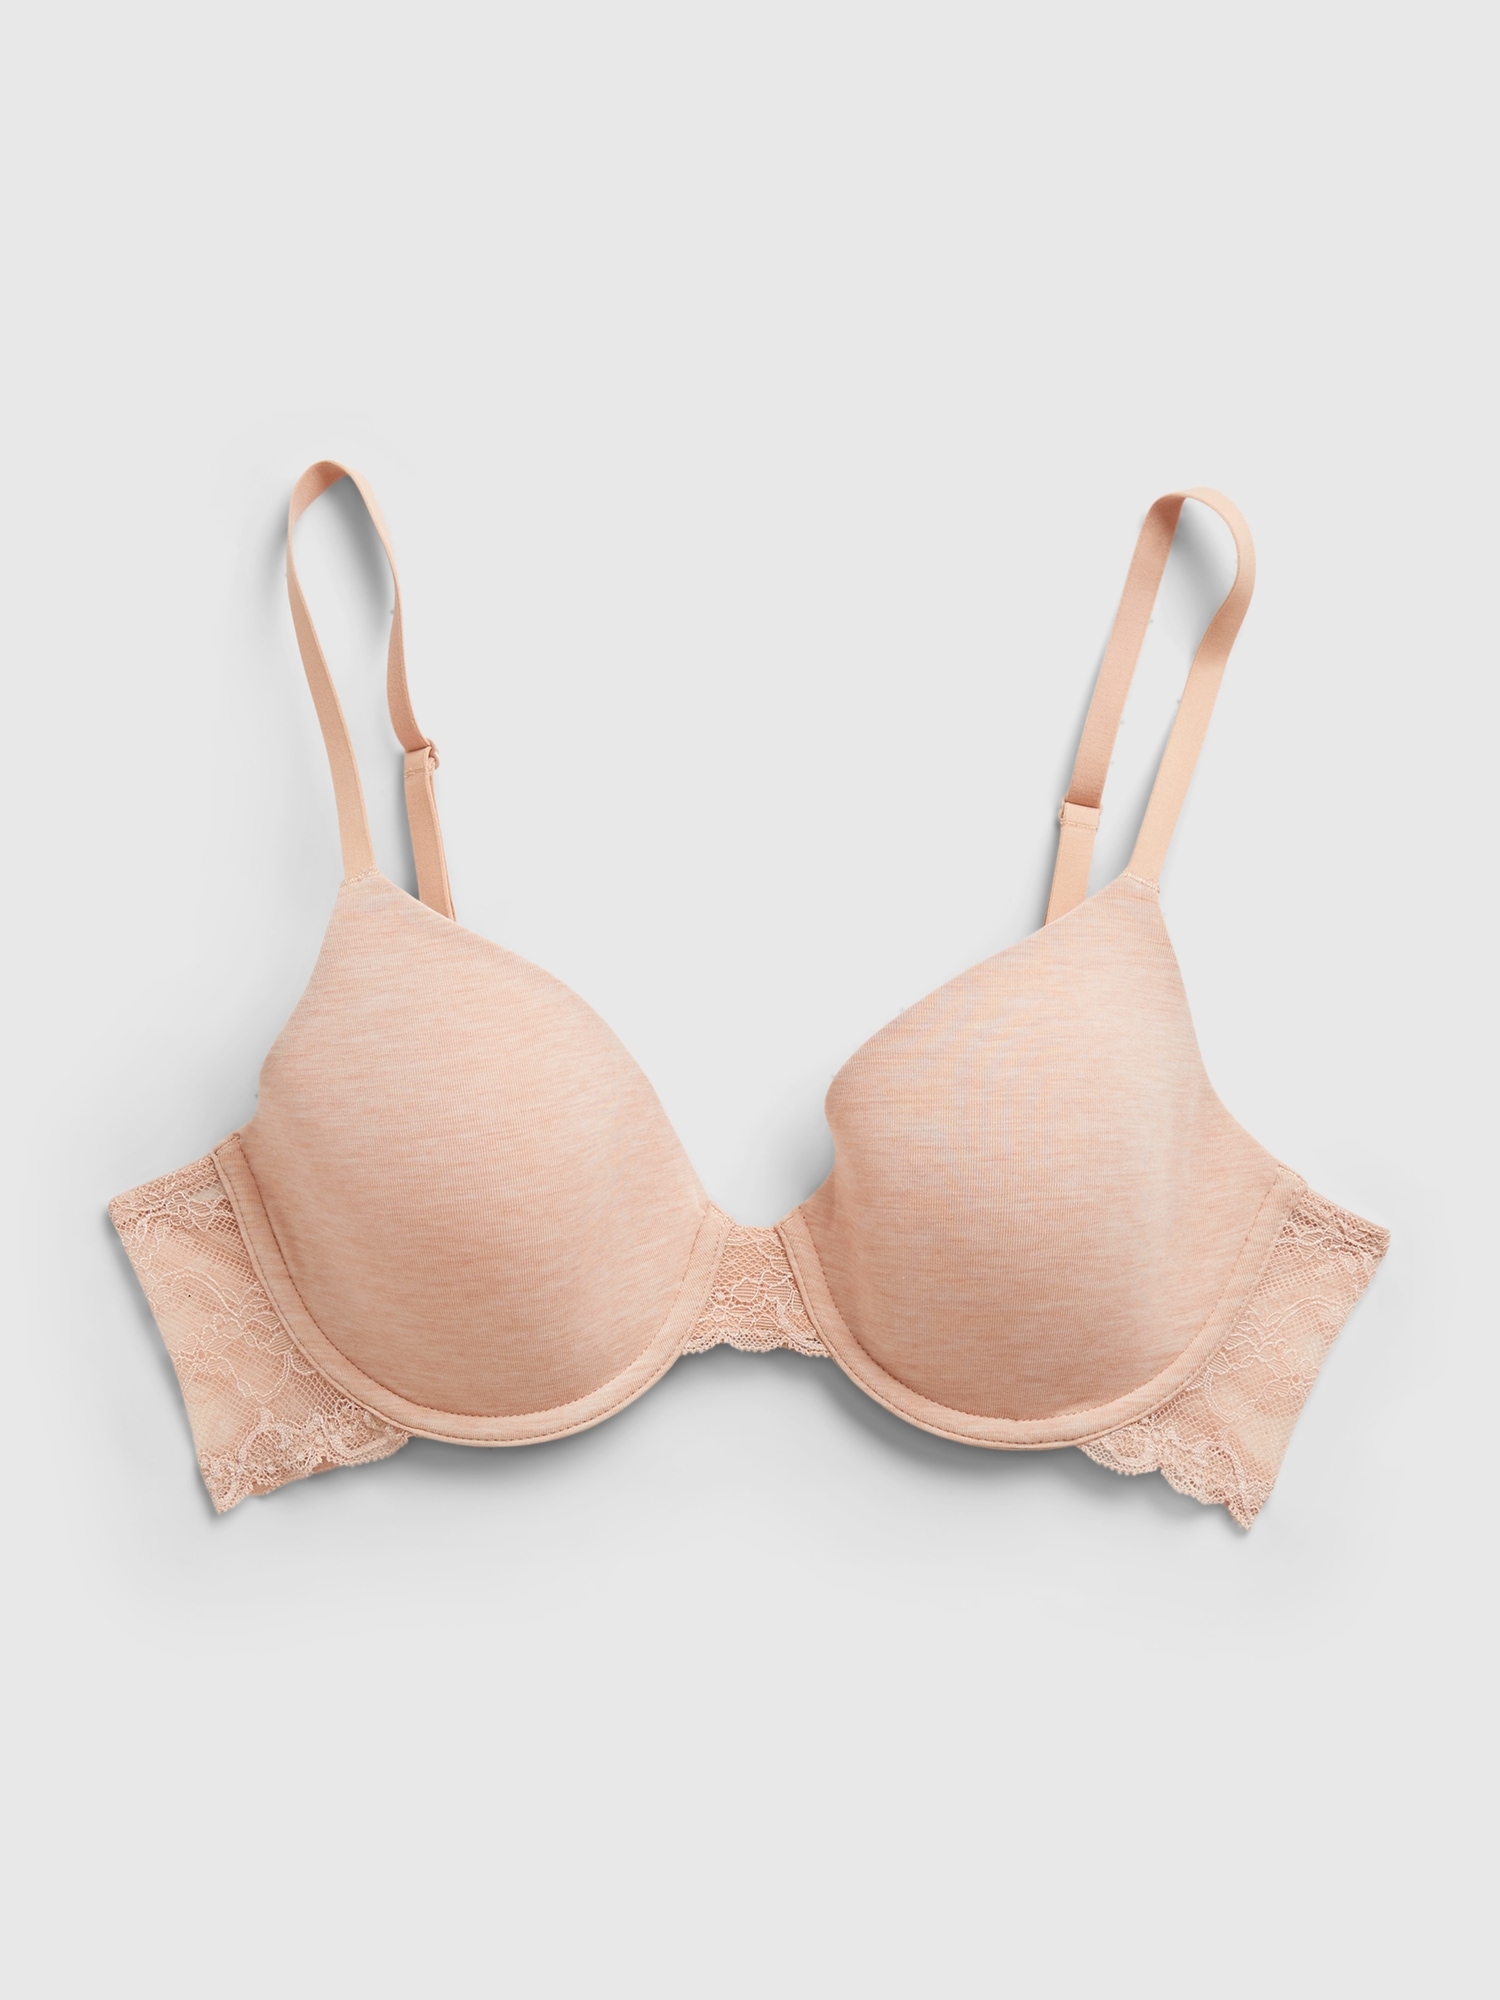 CLZOUD Comfy Bras for Women B Lace Women Full Cup Thin